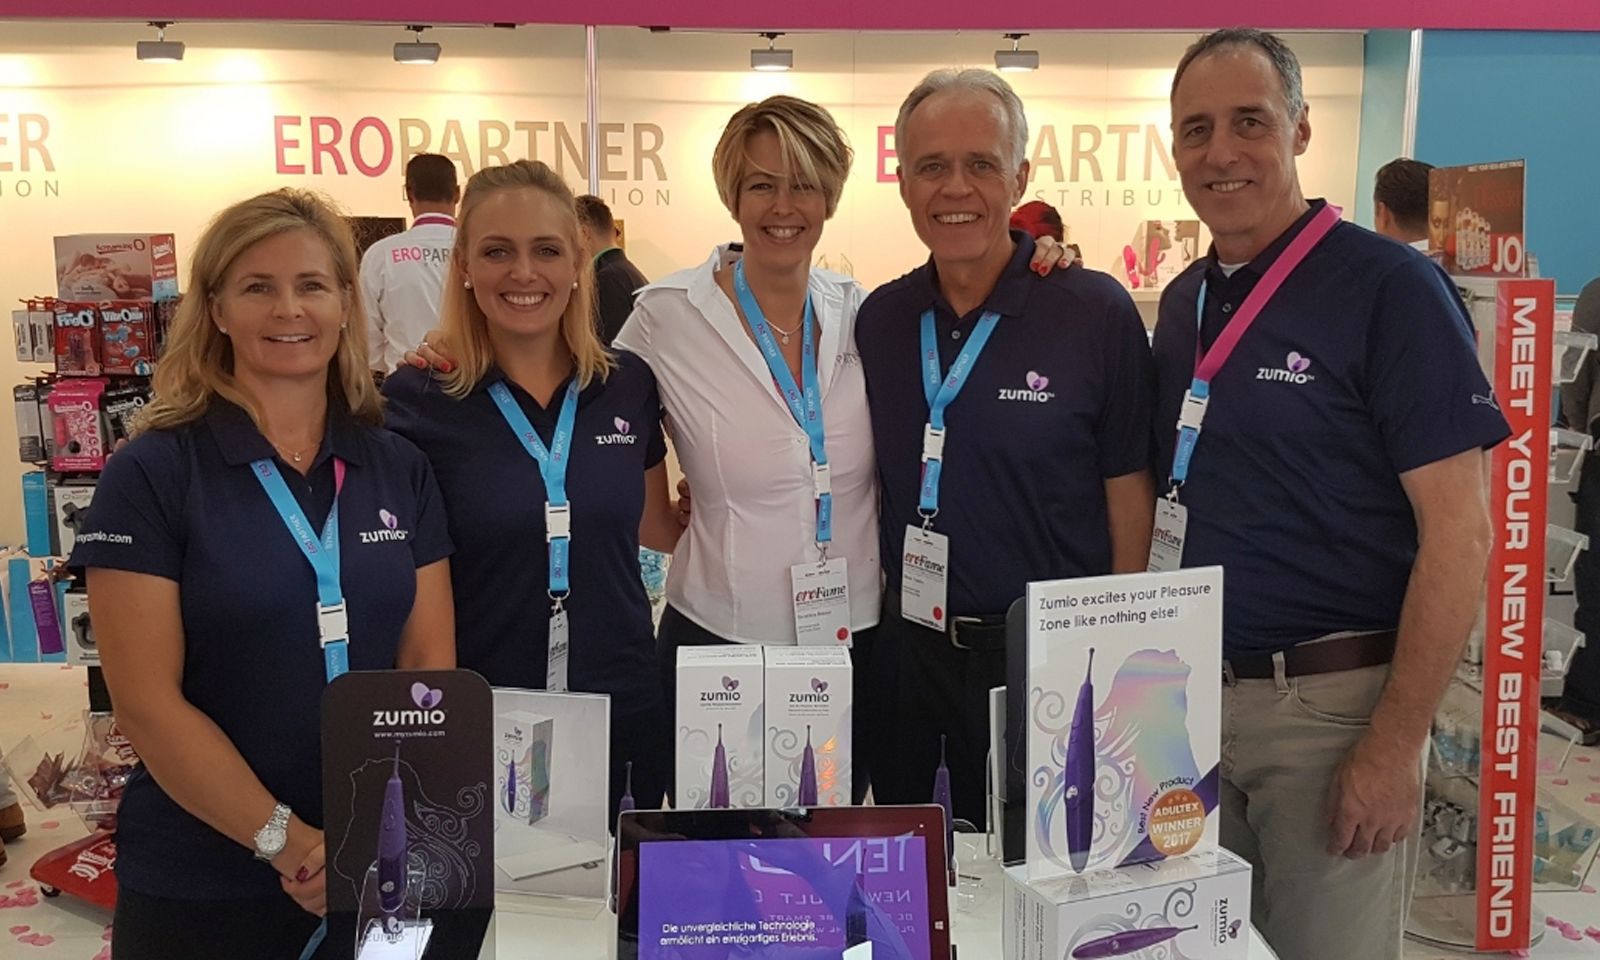 Eropartner’s Launch of Zumio at eroFame A Success